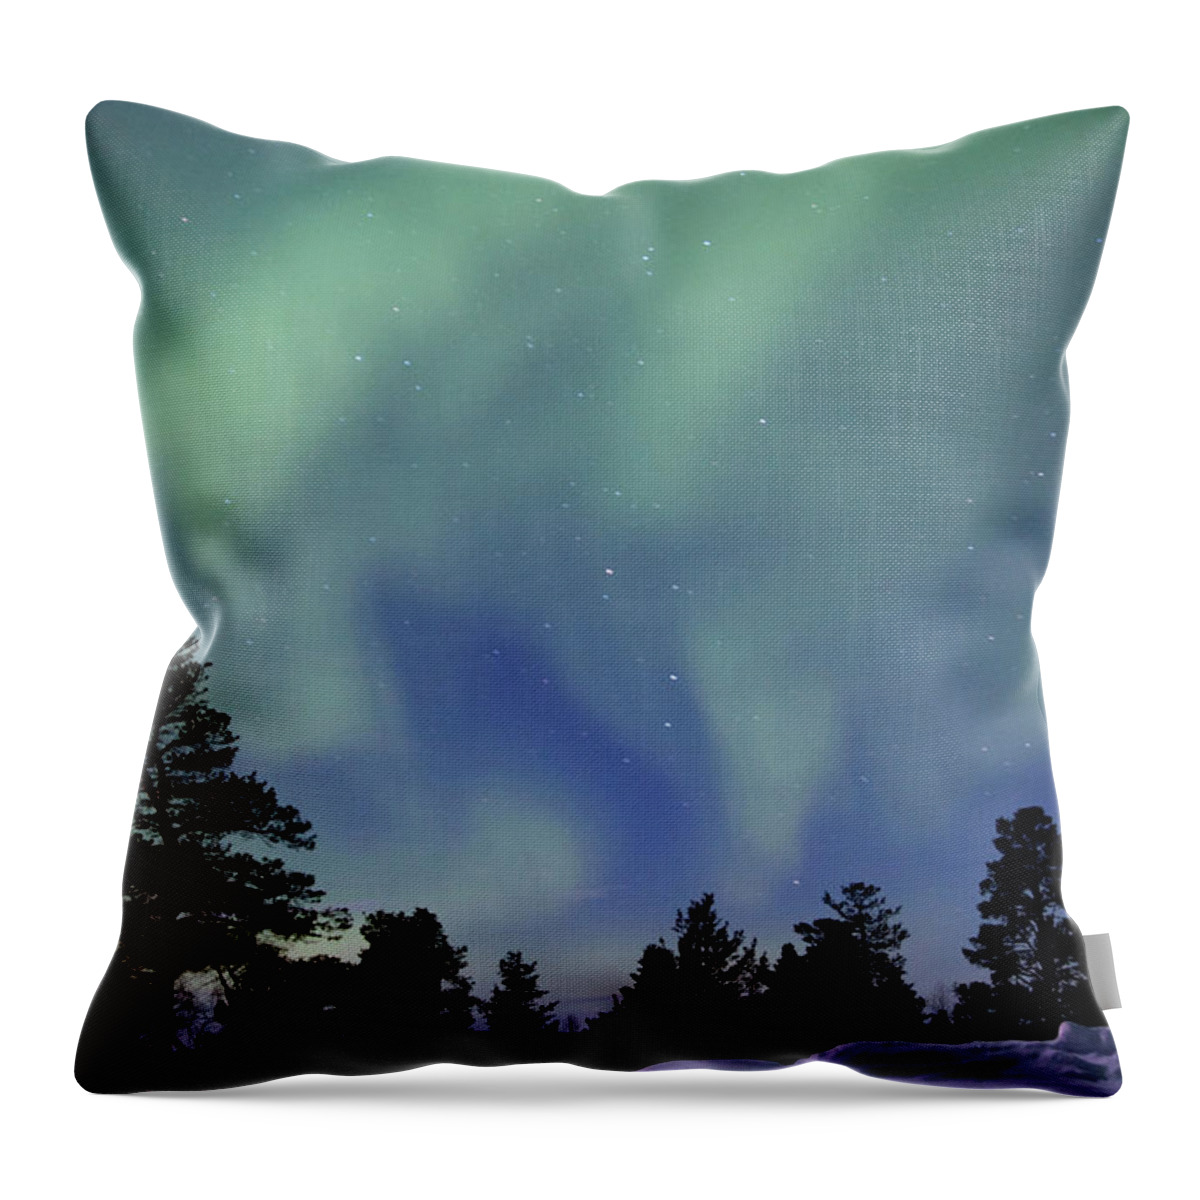 Snow Throw Pillow featuring the photograph Northern Lights Over Trees by Richard Mcmanus